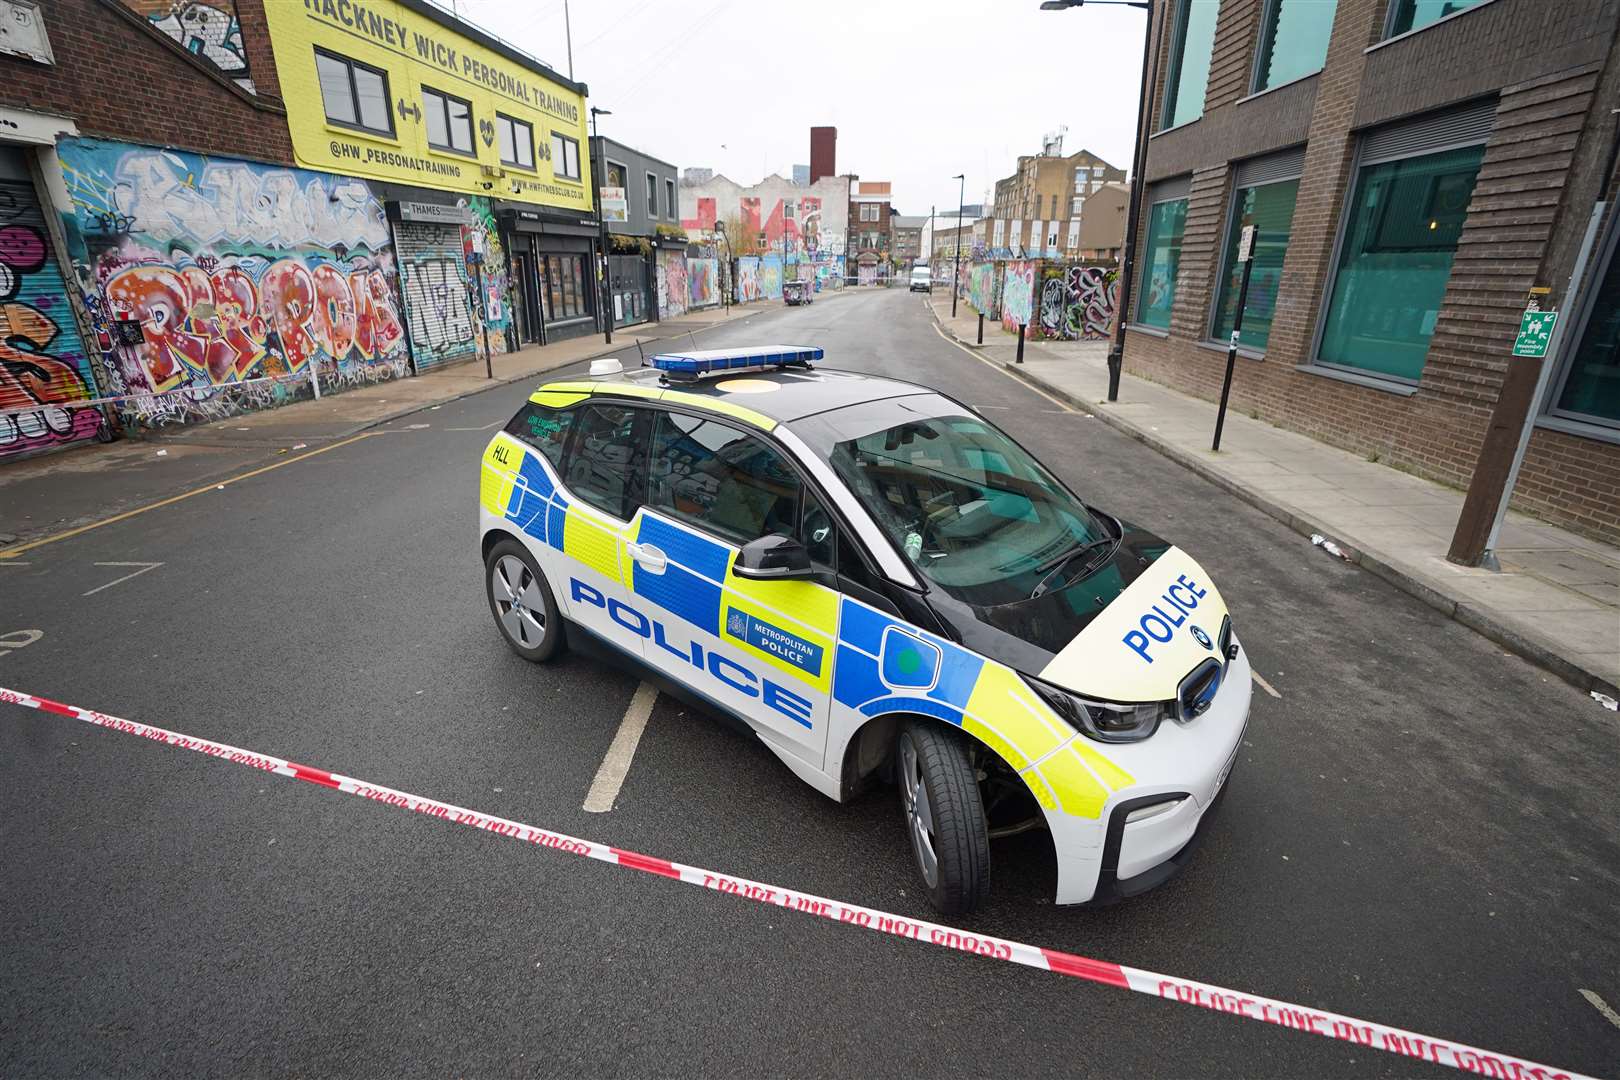 A police car near the scene at White Post Lane, Hackney Wick, east London, after two men were stabbed in the early hours of Saturday morning (James Manning/PA)